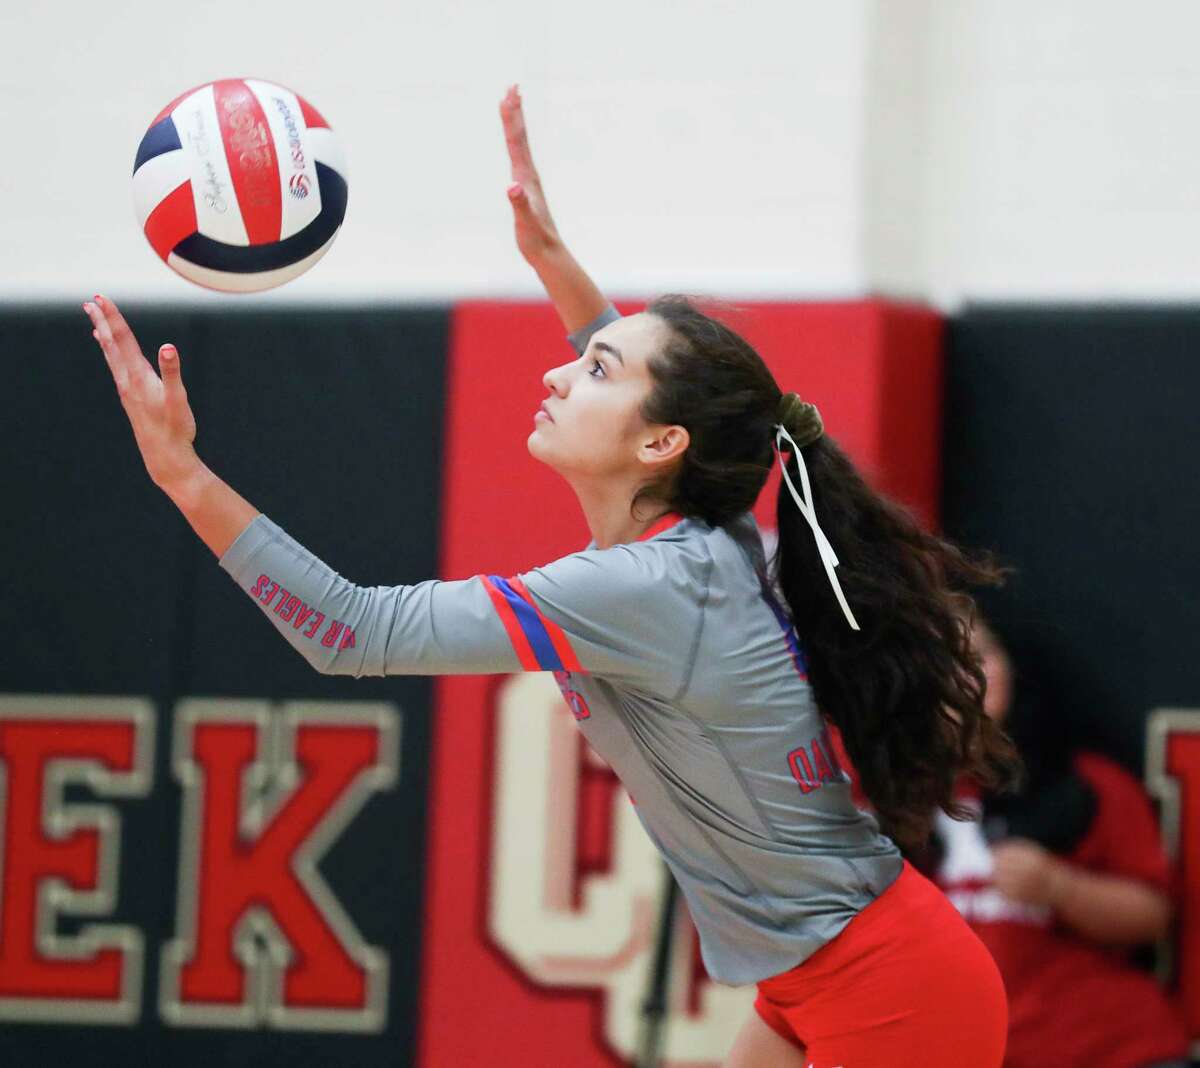 Oak Ridge's Lily Campos (4) serves the ball during the first set of a District 13-6A high school volleyball match at Caney Creek High School, Tuesday, Sept. 20, 2022, in Grangerland.